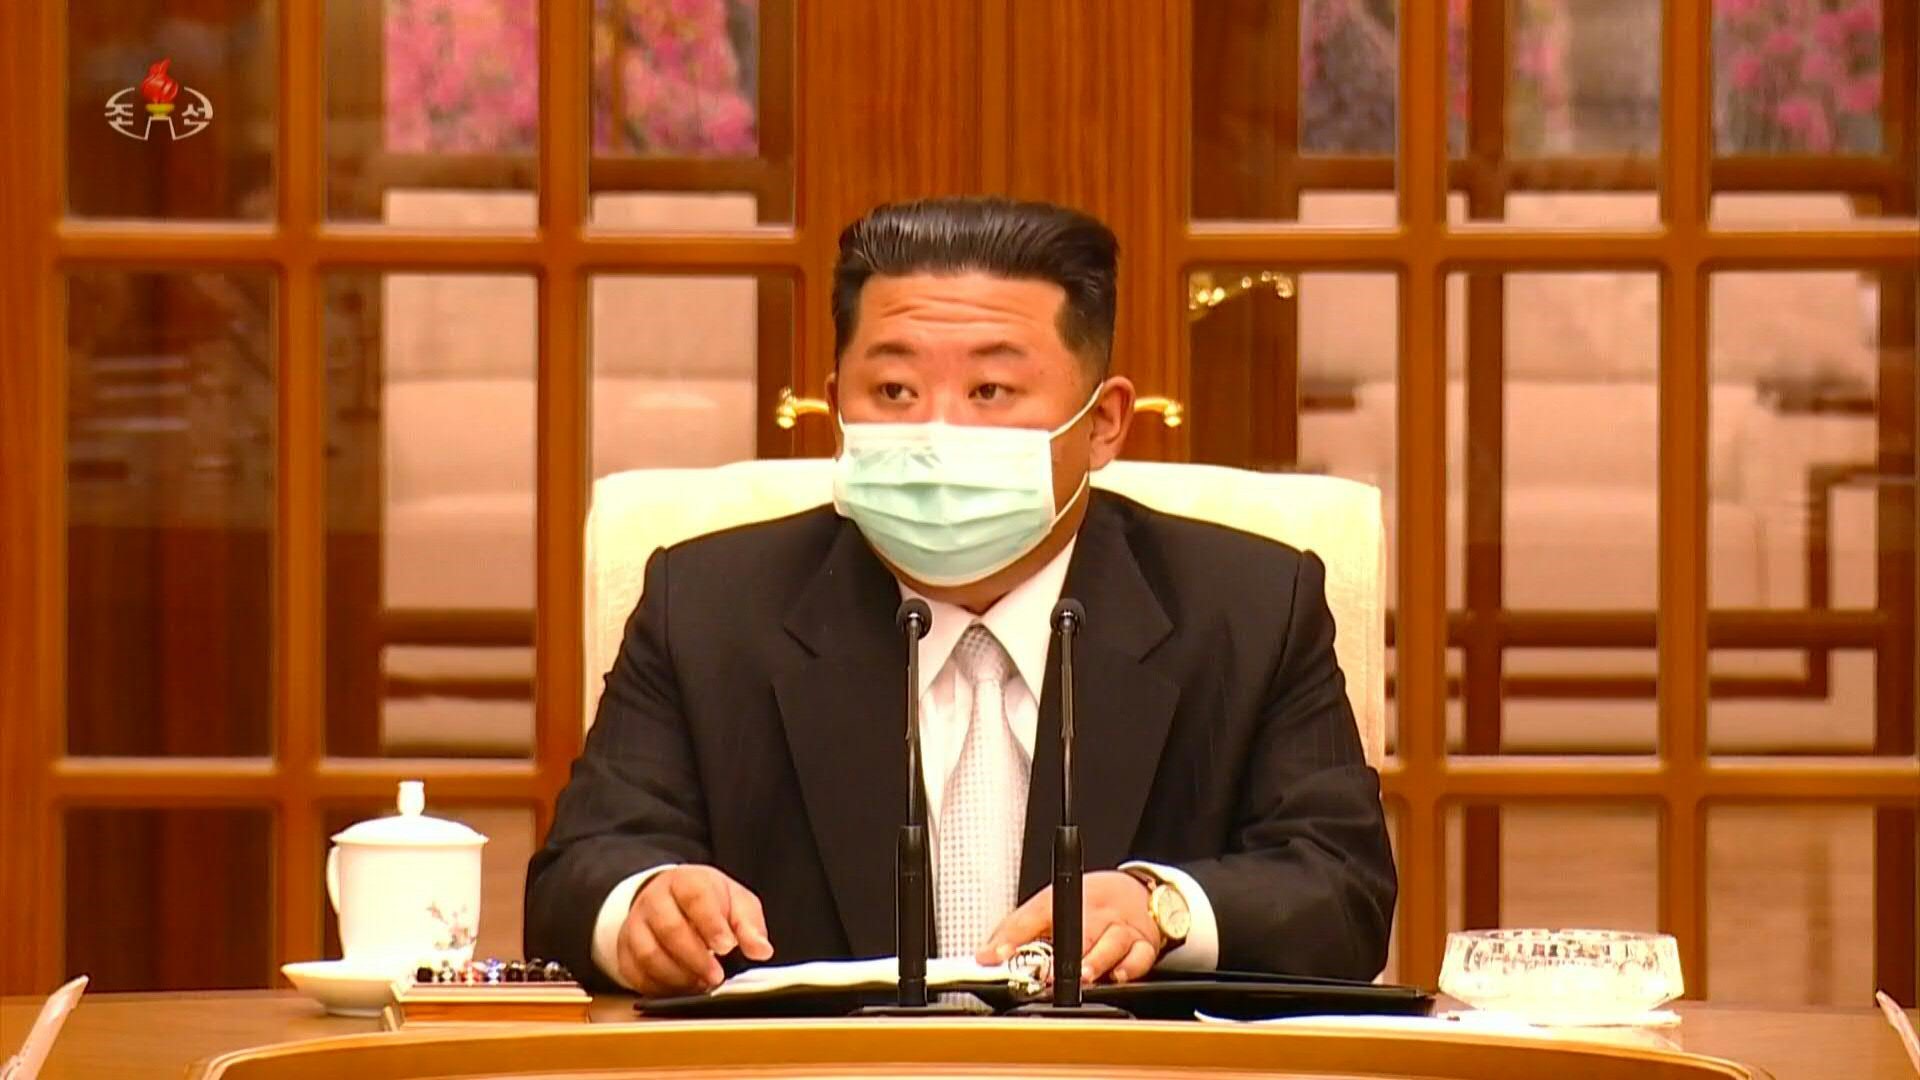 North Korea on Thursday acknowledged its first outbreak of covid-19 since the start of the pandemic and declared a "serious national emergency" before which leader Kim Jong Un ordered confinements throughout the country